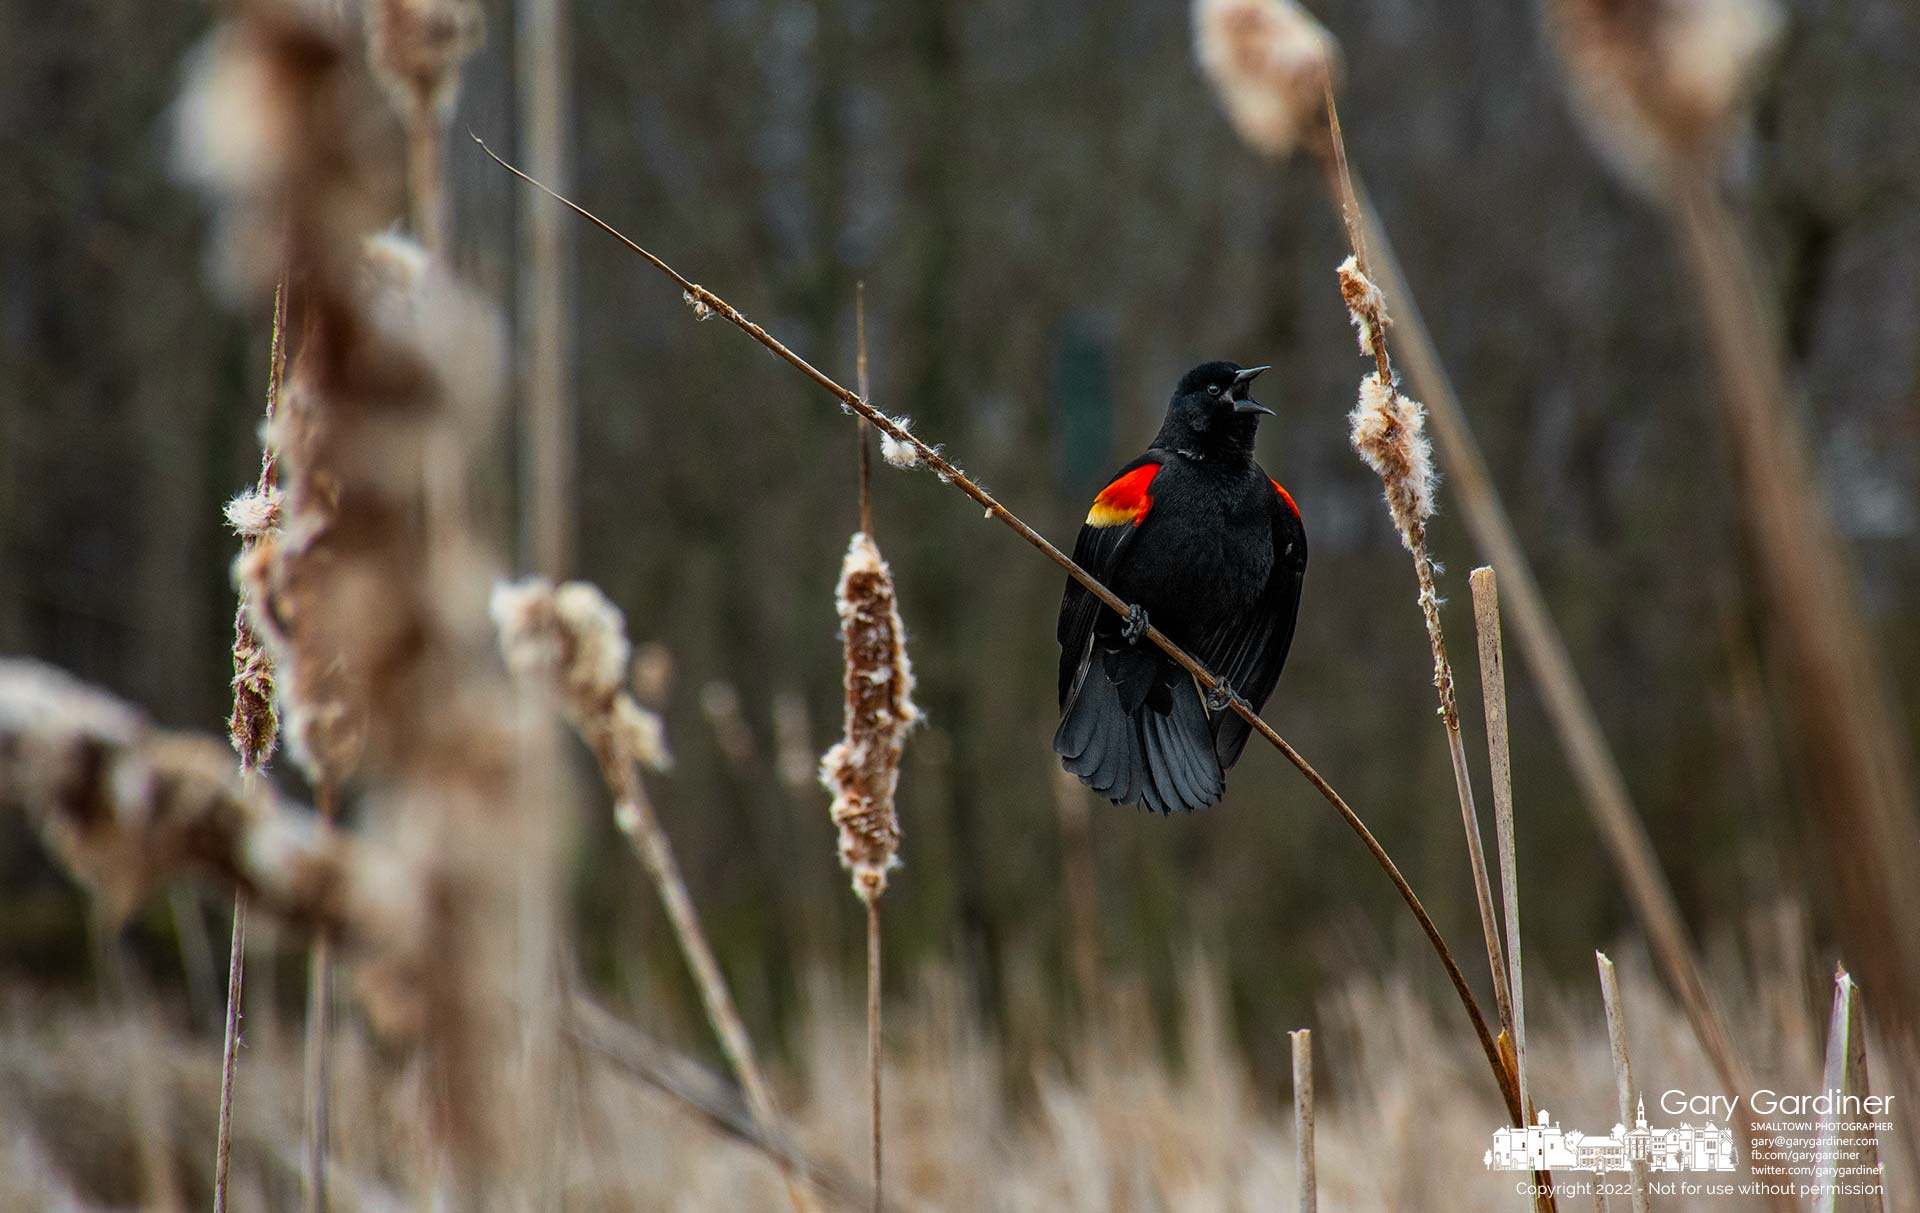 A red-winged blackbird breaks into song as it sits on a cattail stalk on the edge of the wetland at Boyer Nature Preserve. My Final Photo for March 26, 2022.